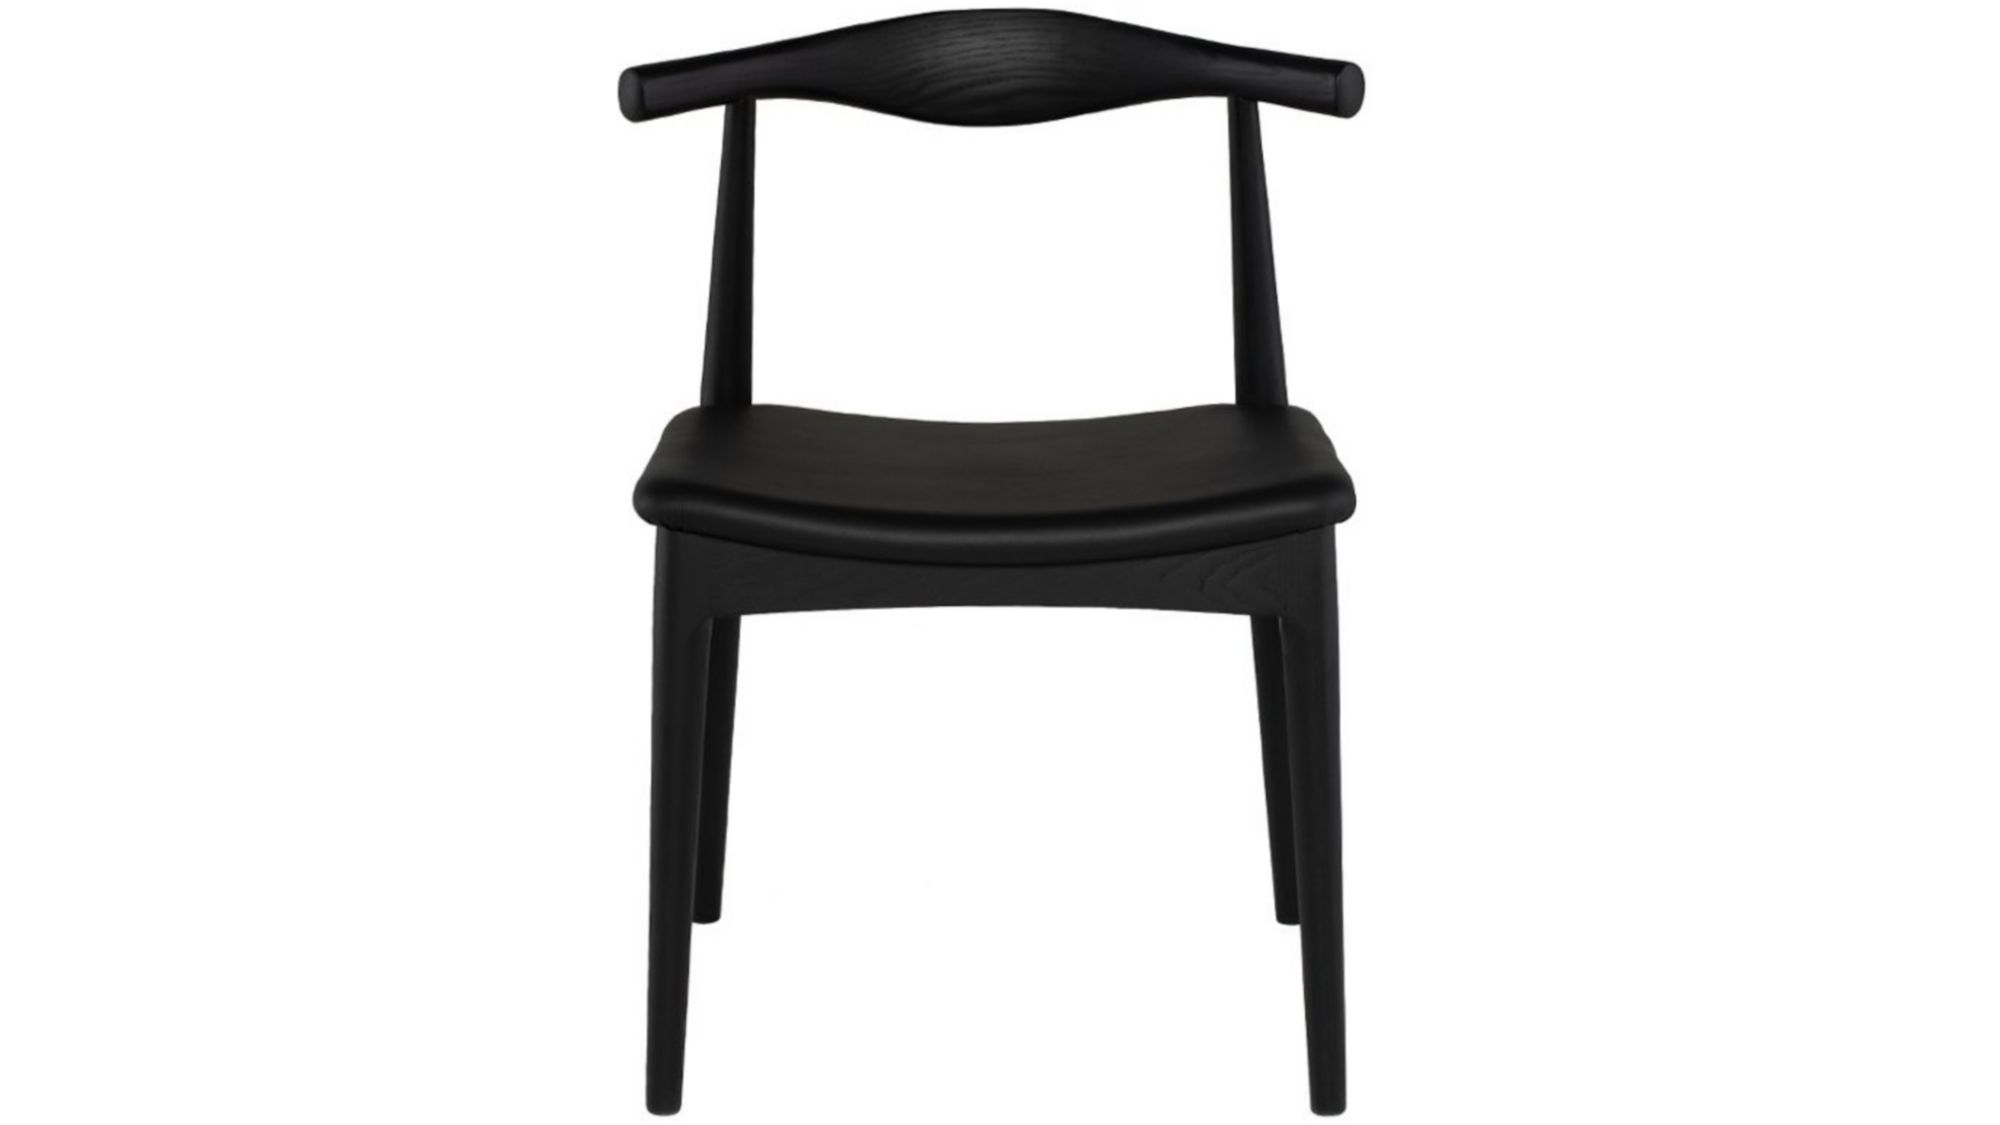 Saal Dining Chair in BLACK by Nuevo